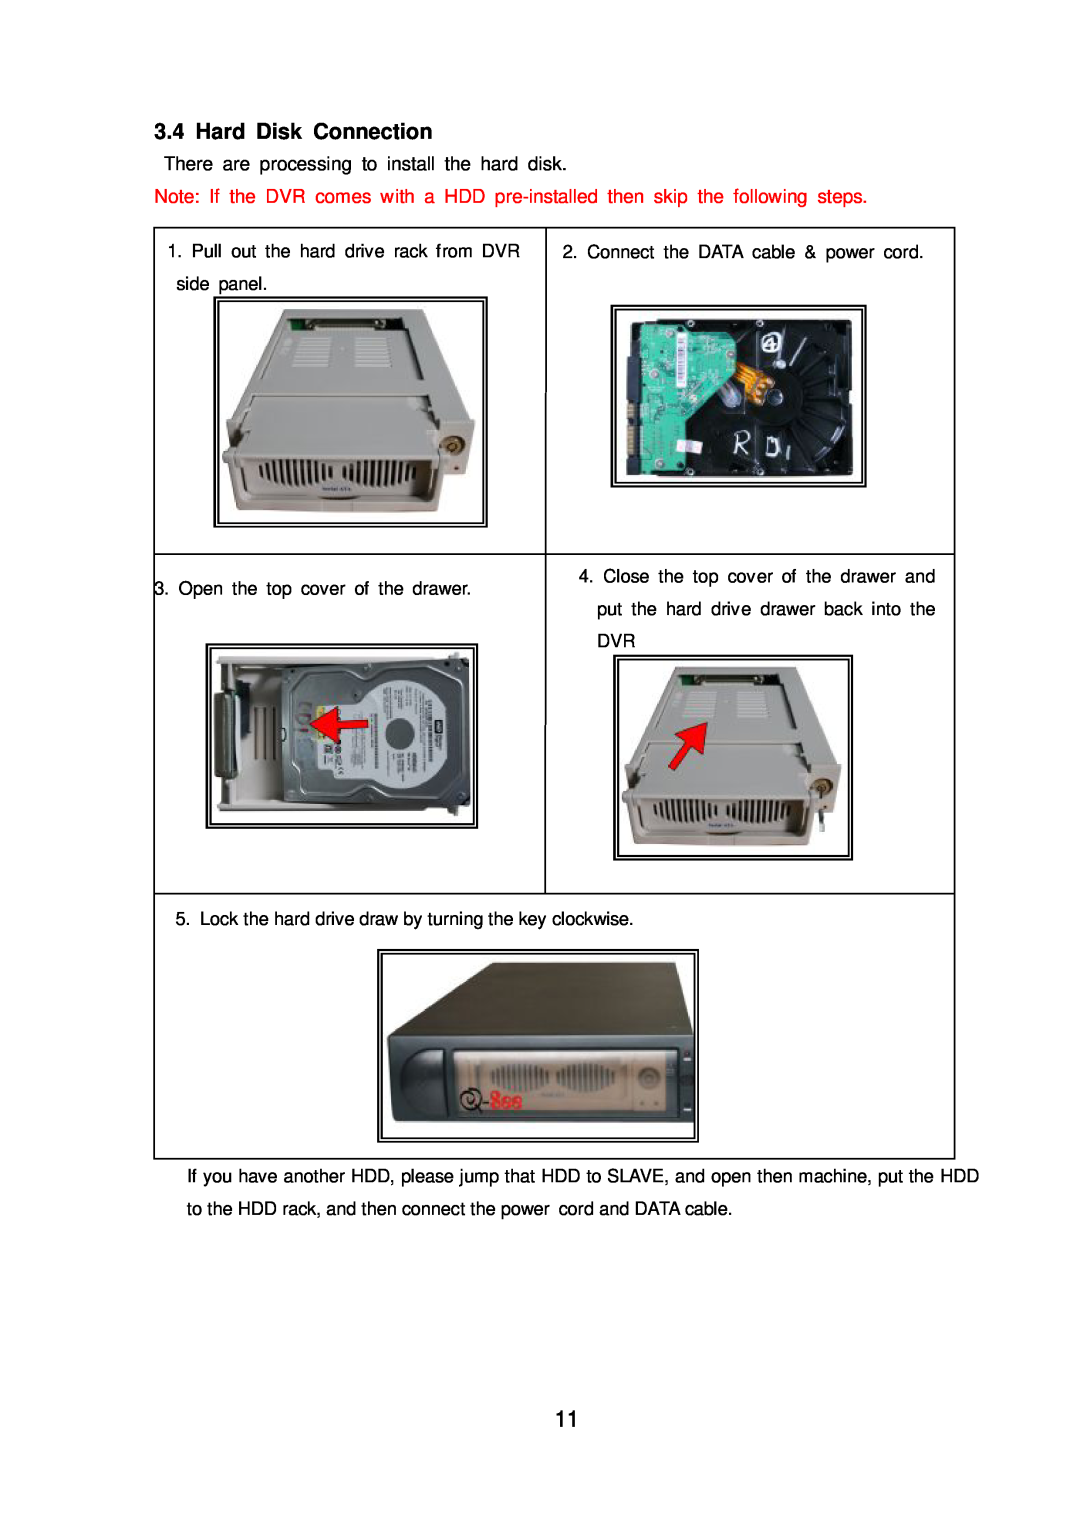 Q-See QSD2216 manual Hard Disk Connection, There are processing to install the hard disk 